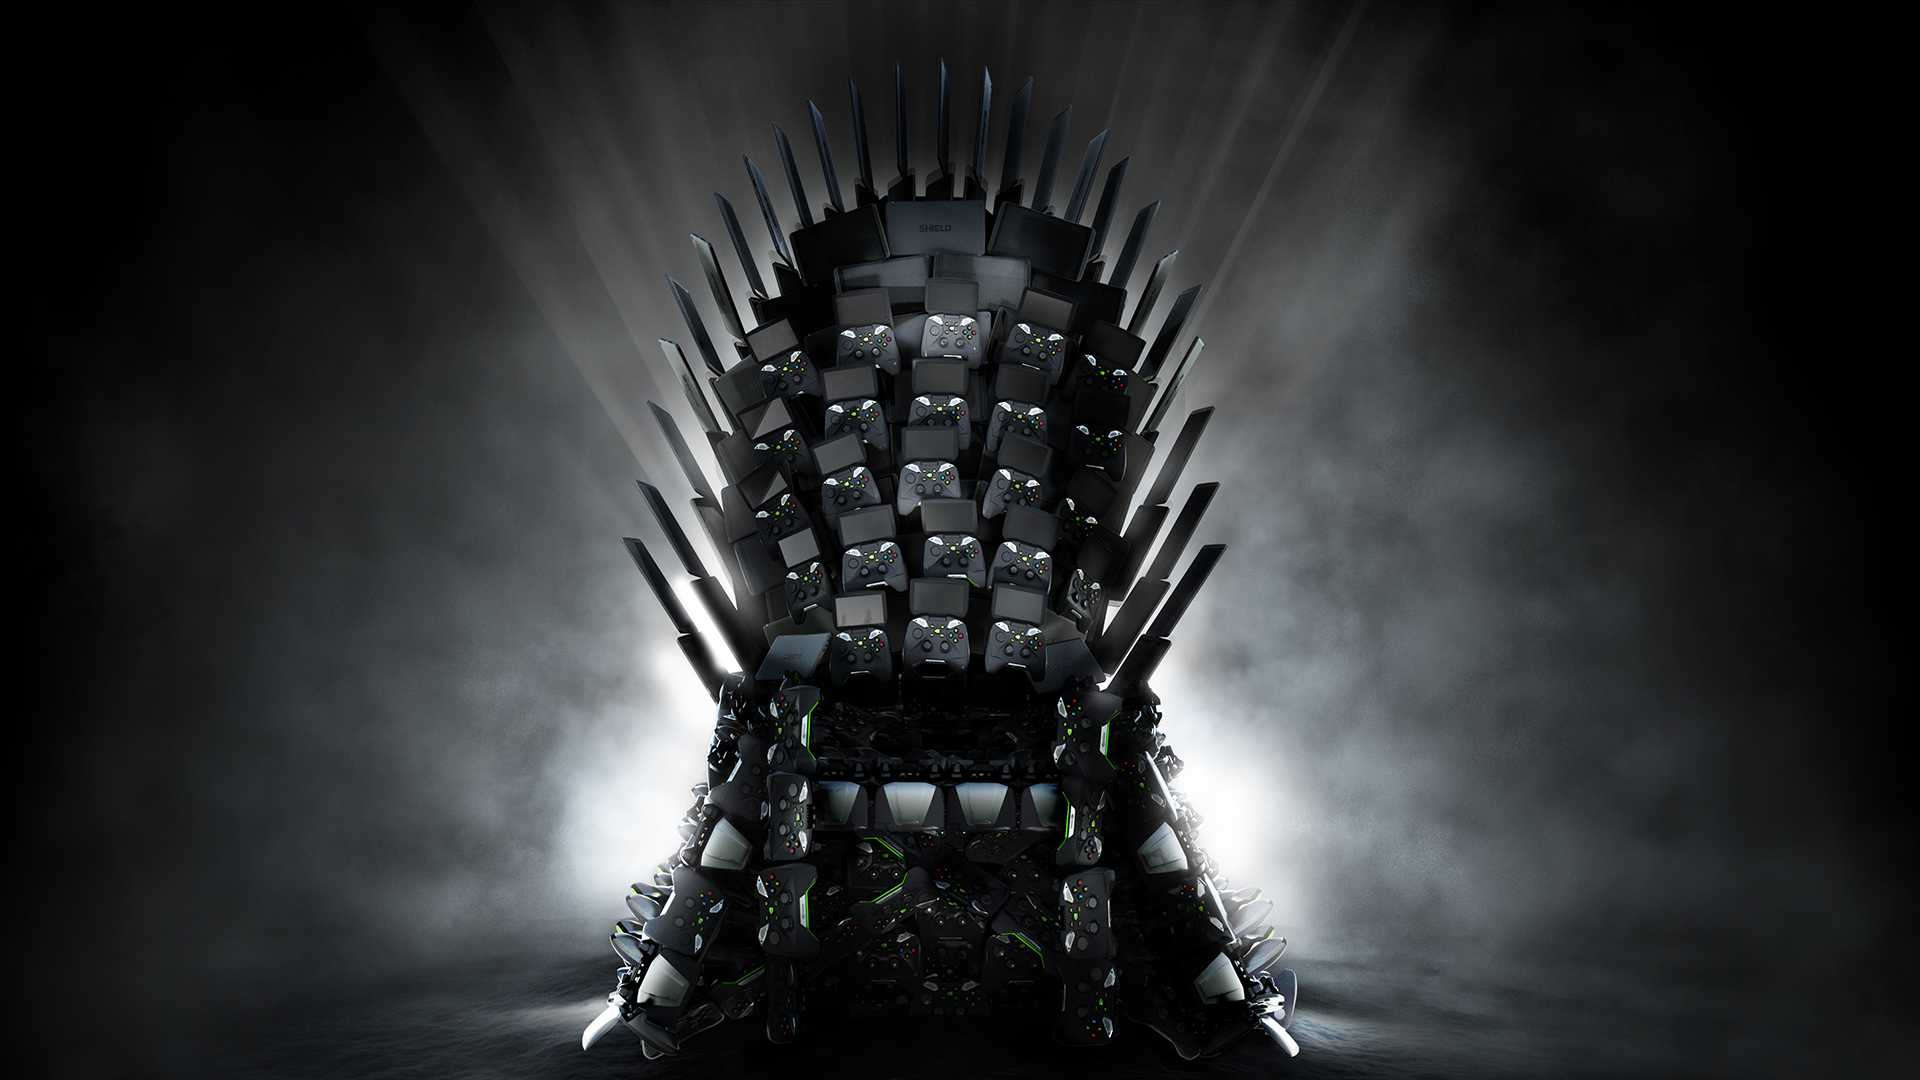 Play Telltales Game of Thrones on NVIDIA SHIELD GeForce